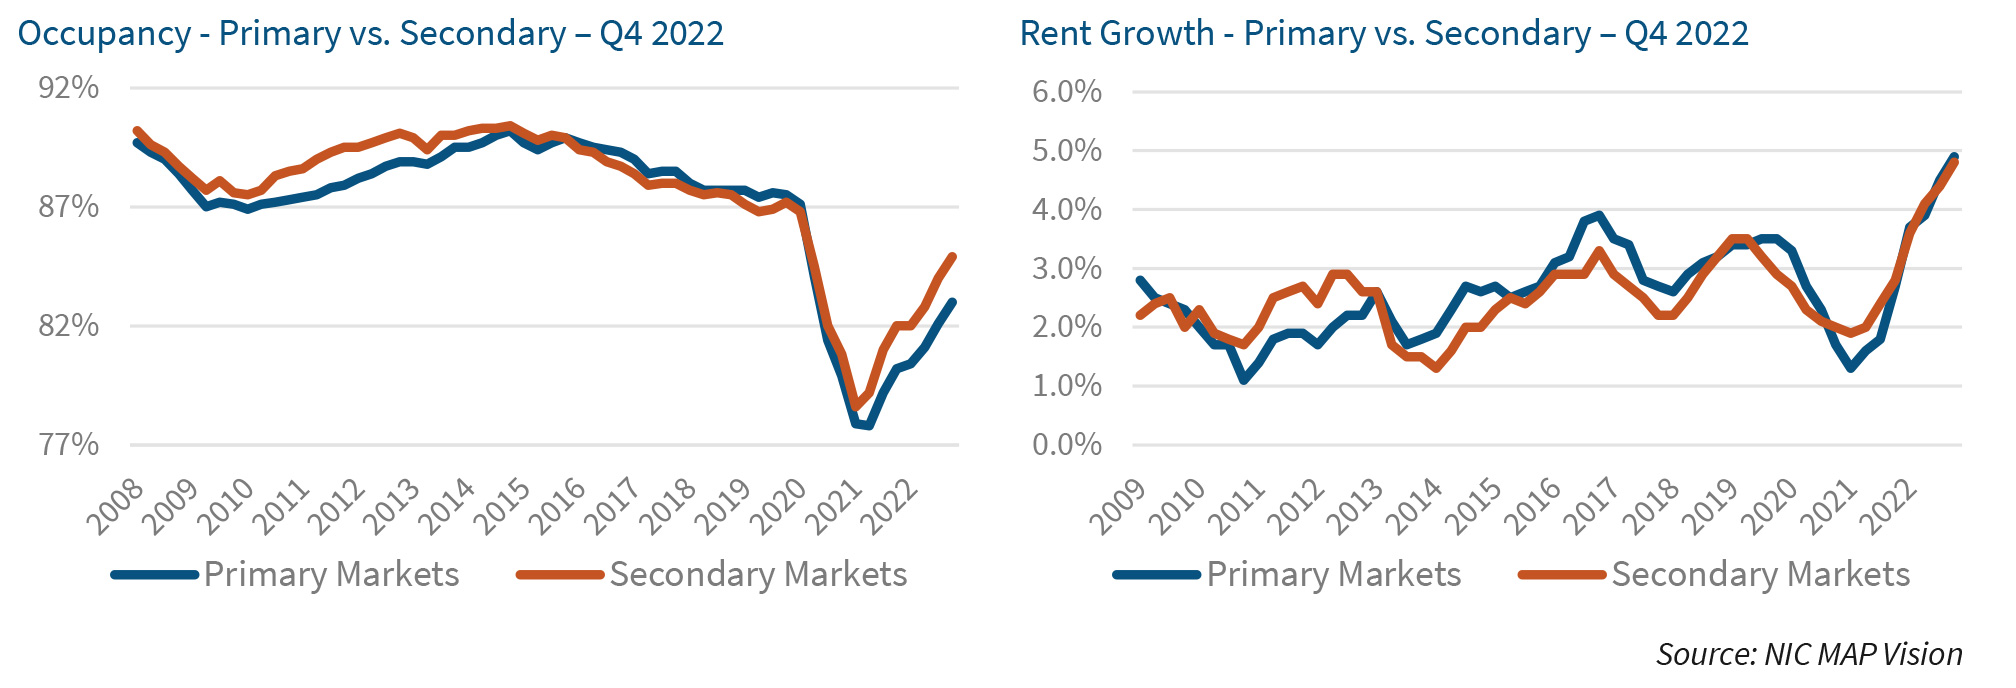 Occupancy - Primary vs. Secondary – Q4 2022 | Rent Growth - Primary vs. Secondary – Q4 2022